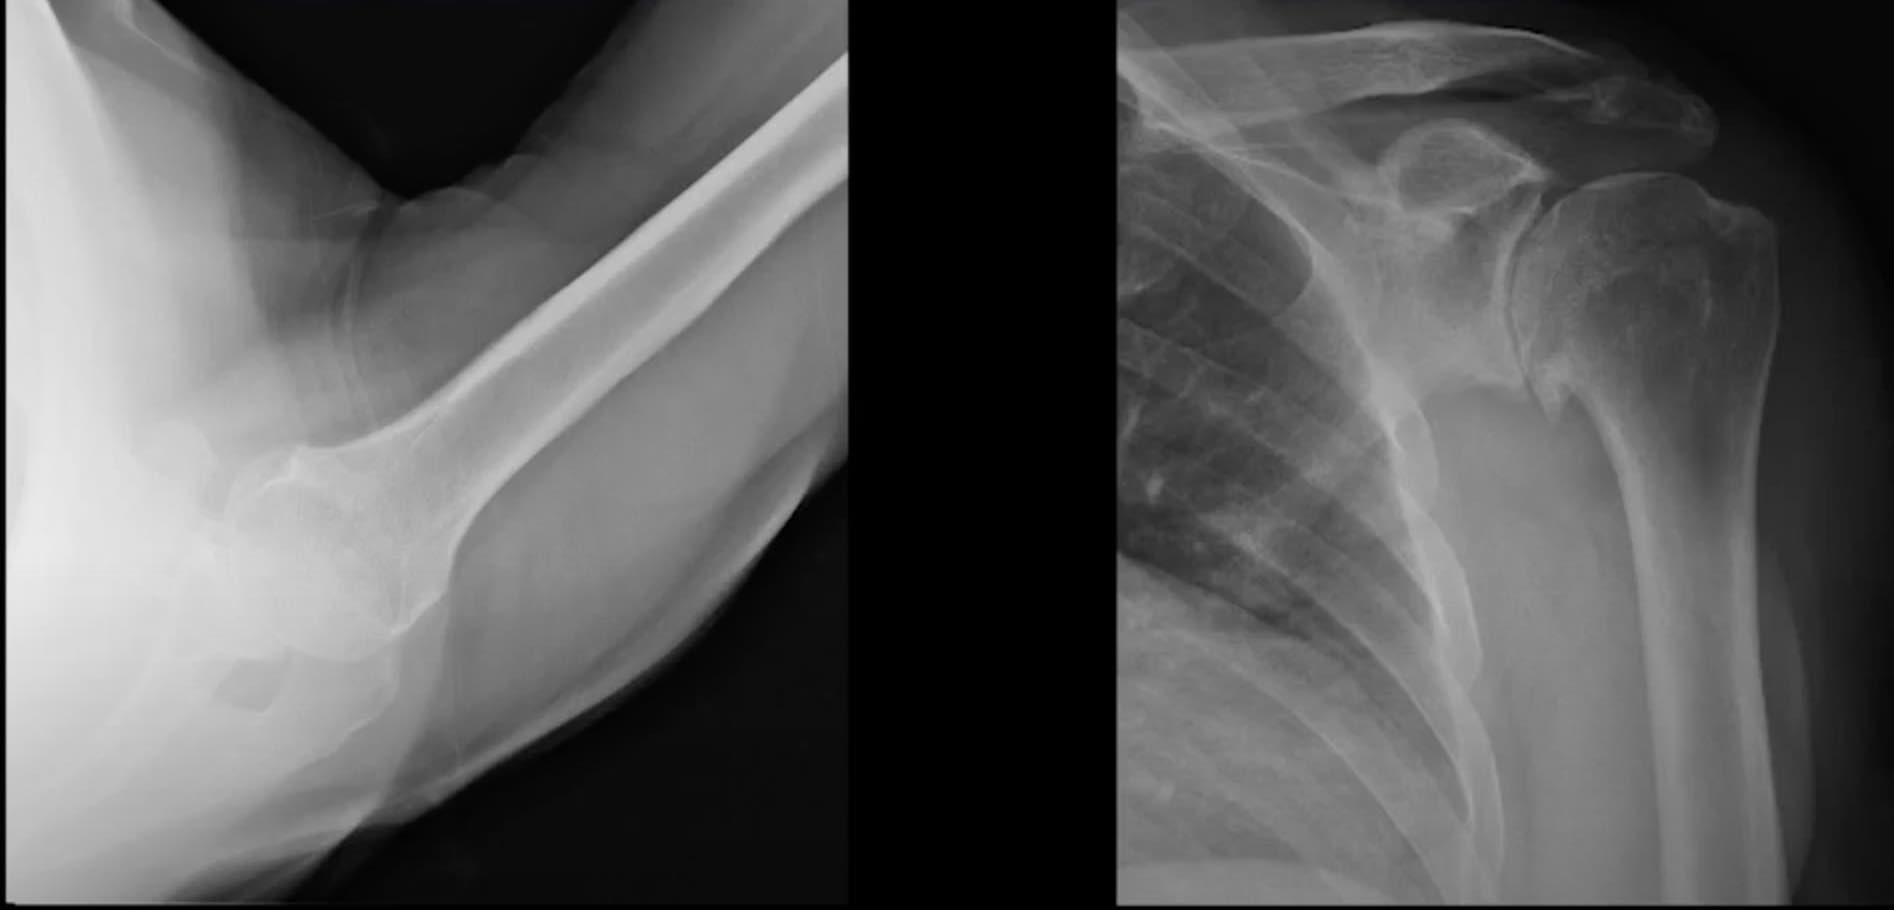 Preop x-rays from a stemless shoulder replacement surgery performed by Dr. John Macy